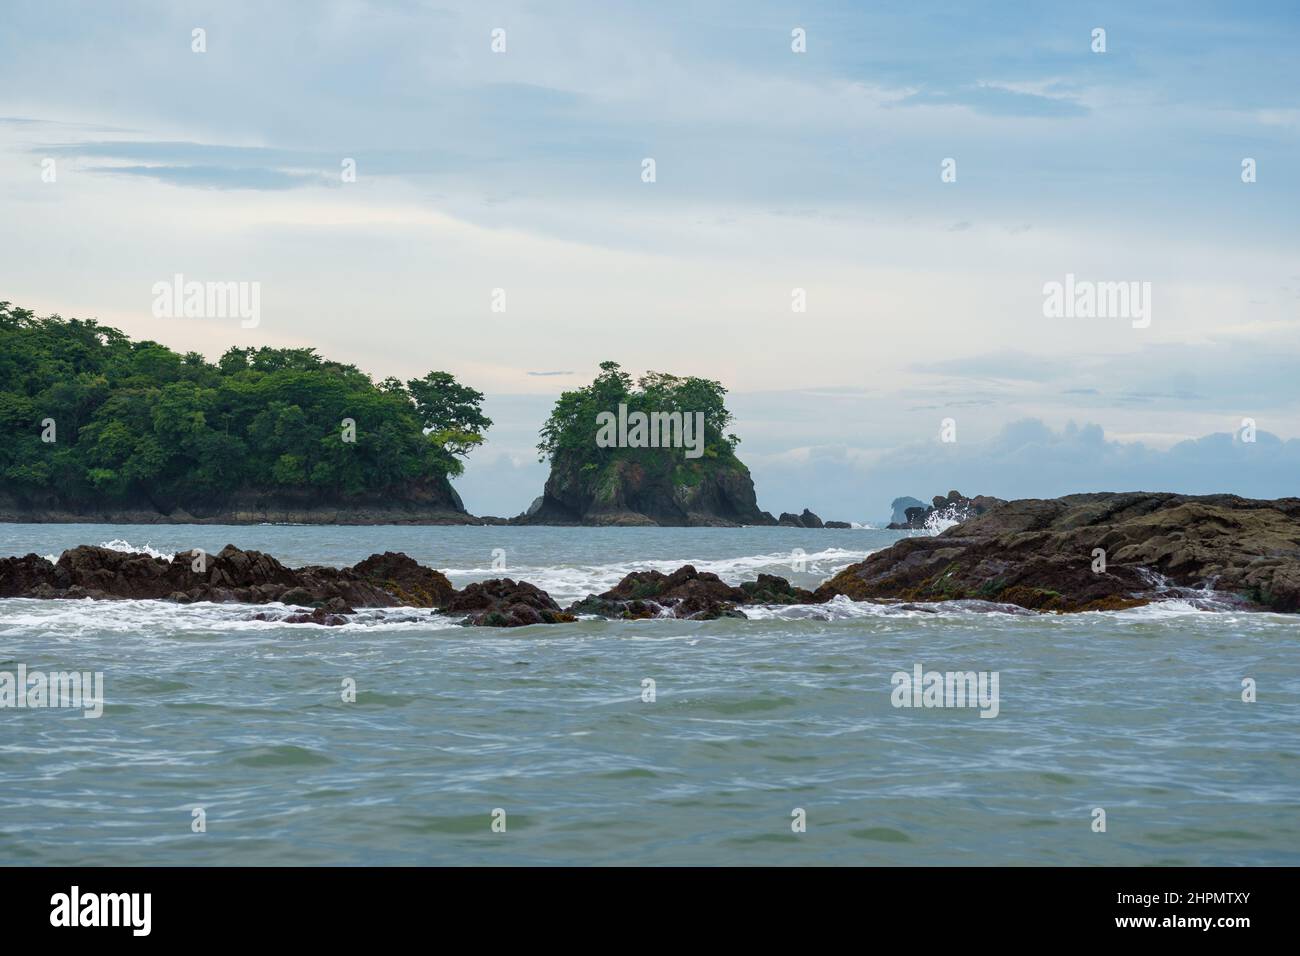 Rocks and uninhabited, forested islands along the Pacific coast of Panama Stock Photo